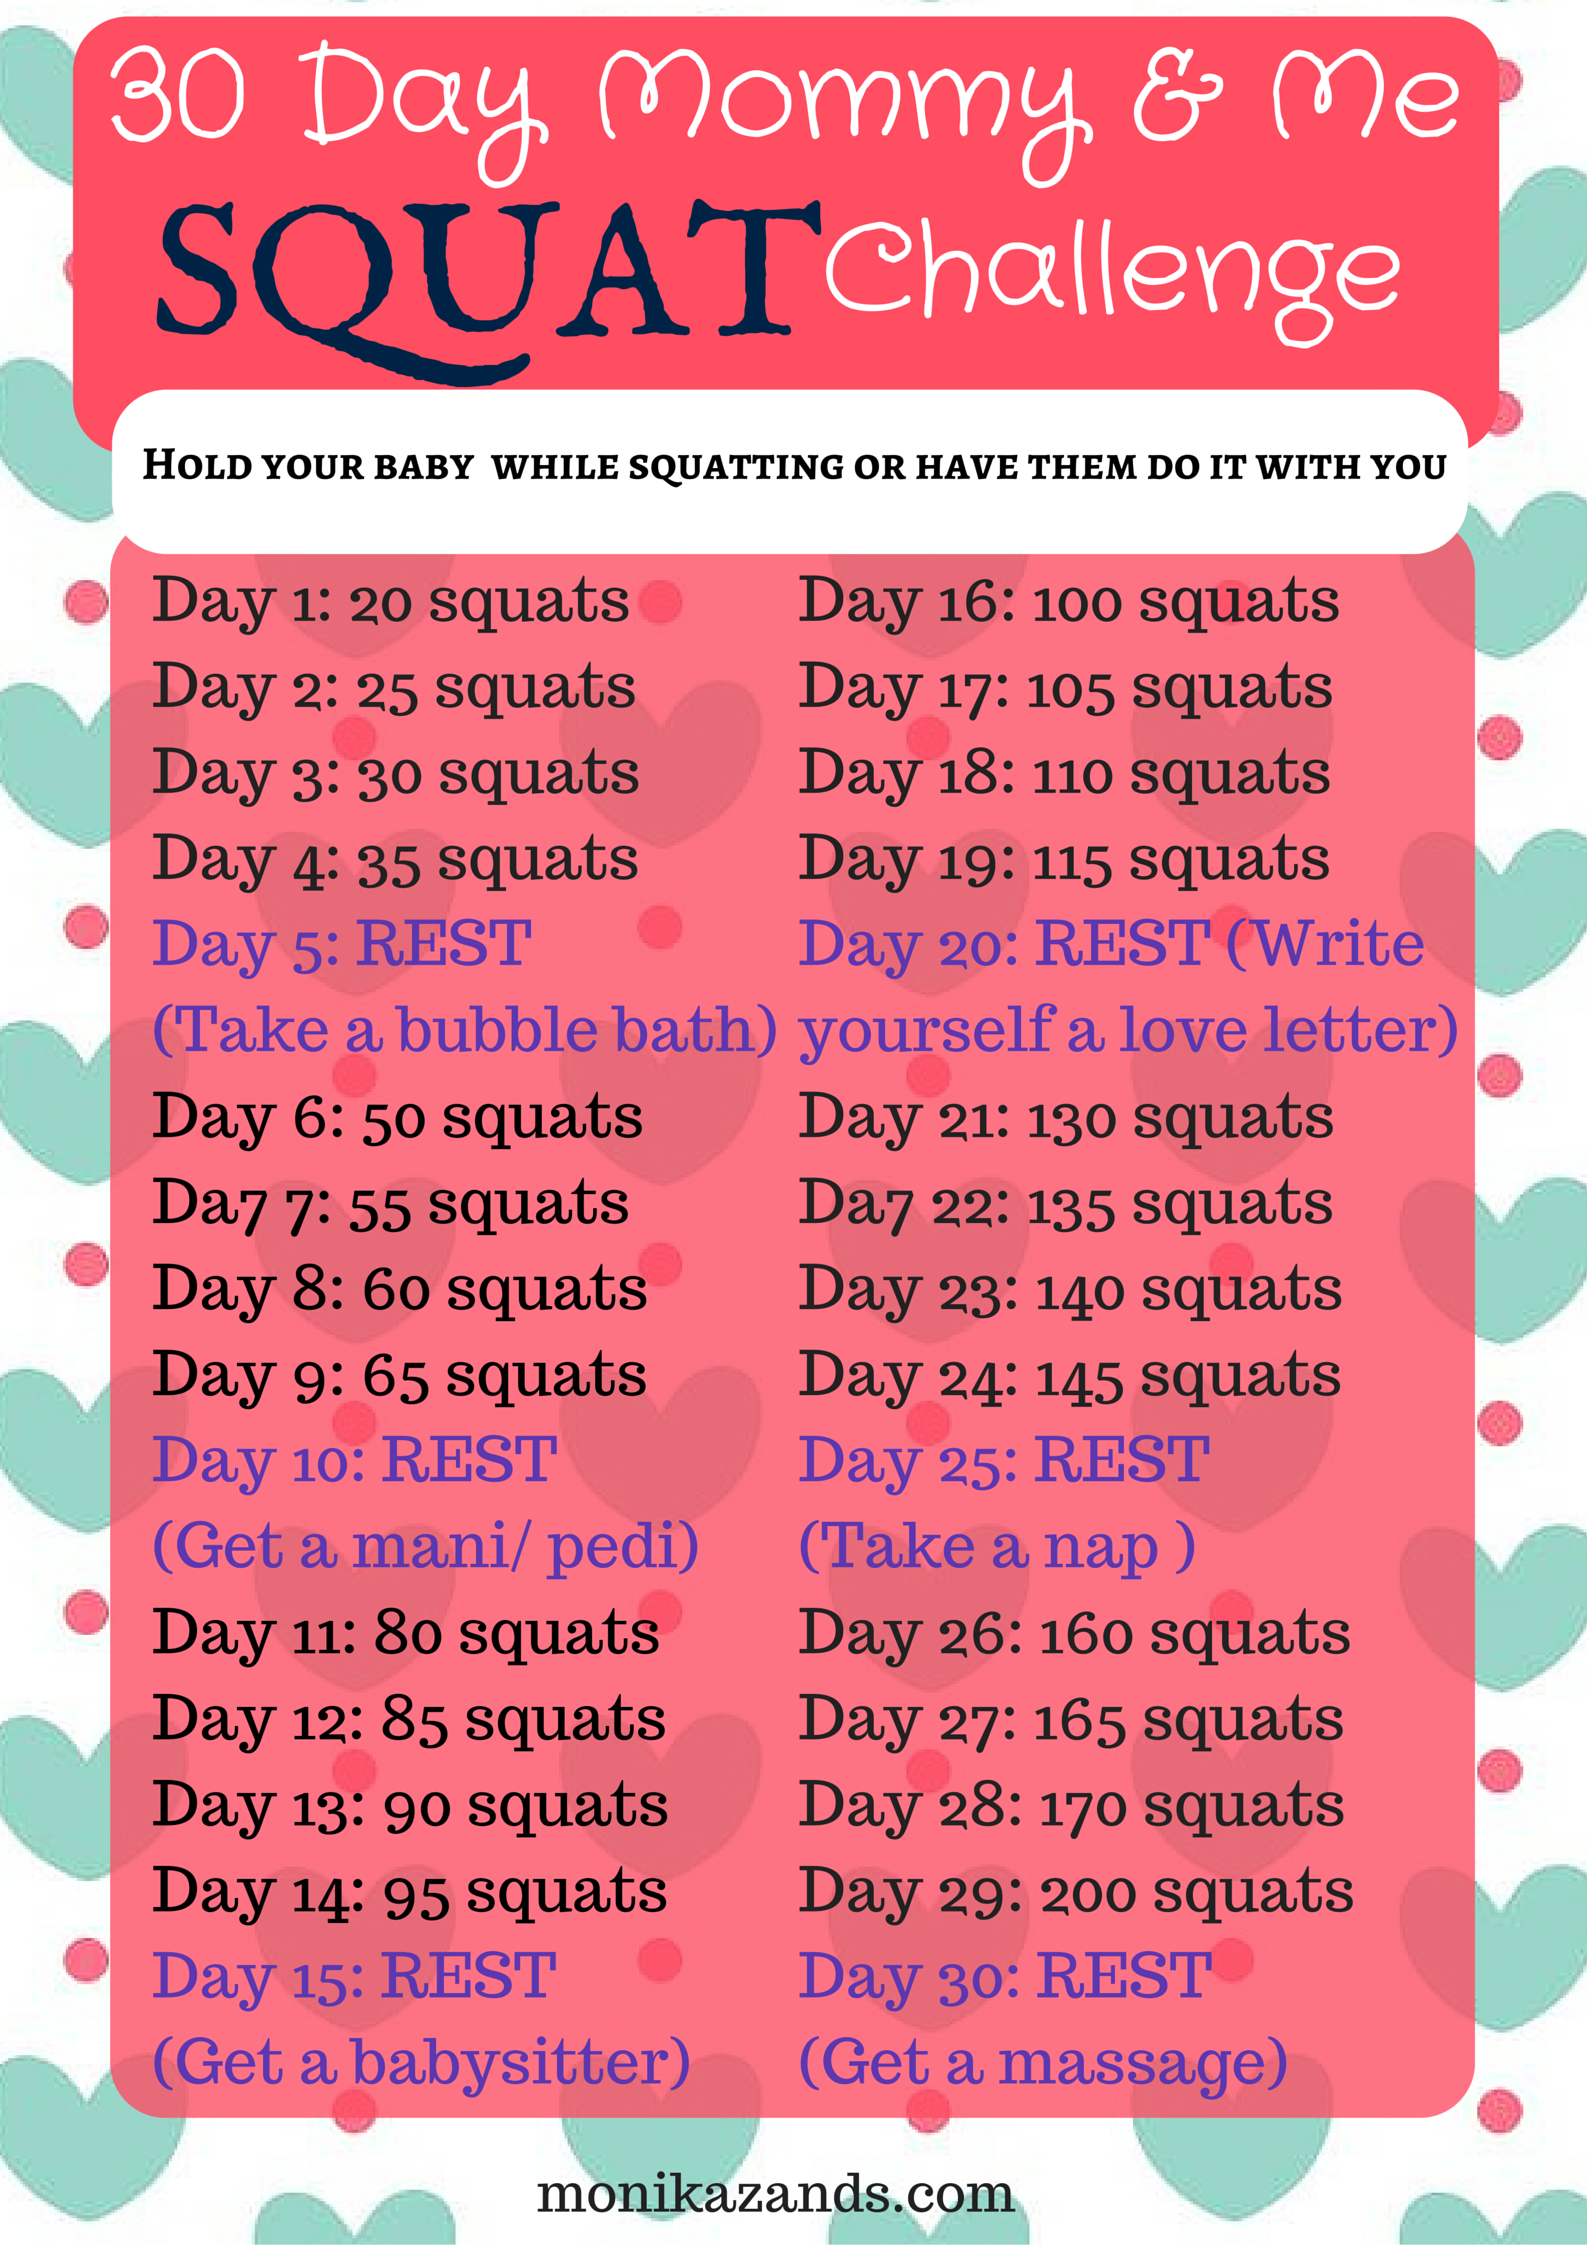 Take on the 30 Day Mommy and Me SQUAT Challenge! Hold your babies or have your kids do them with you -   24 fitness challenge for kids
 ideas